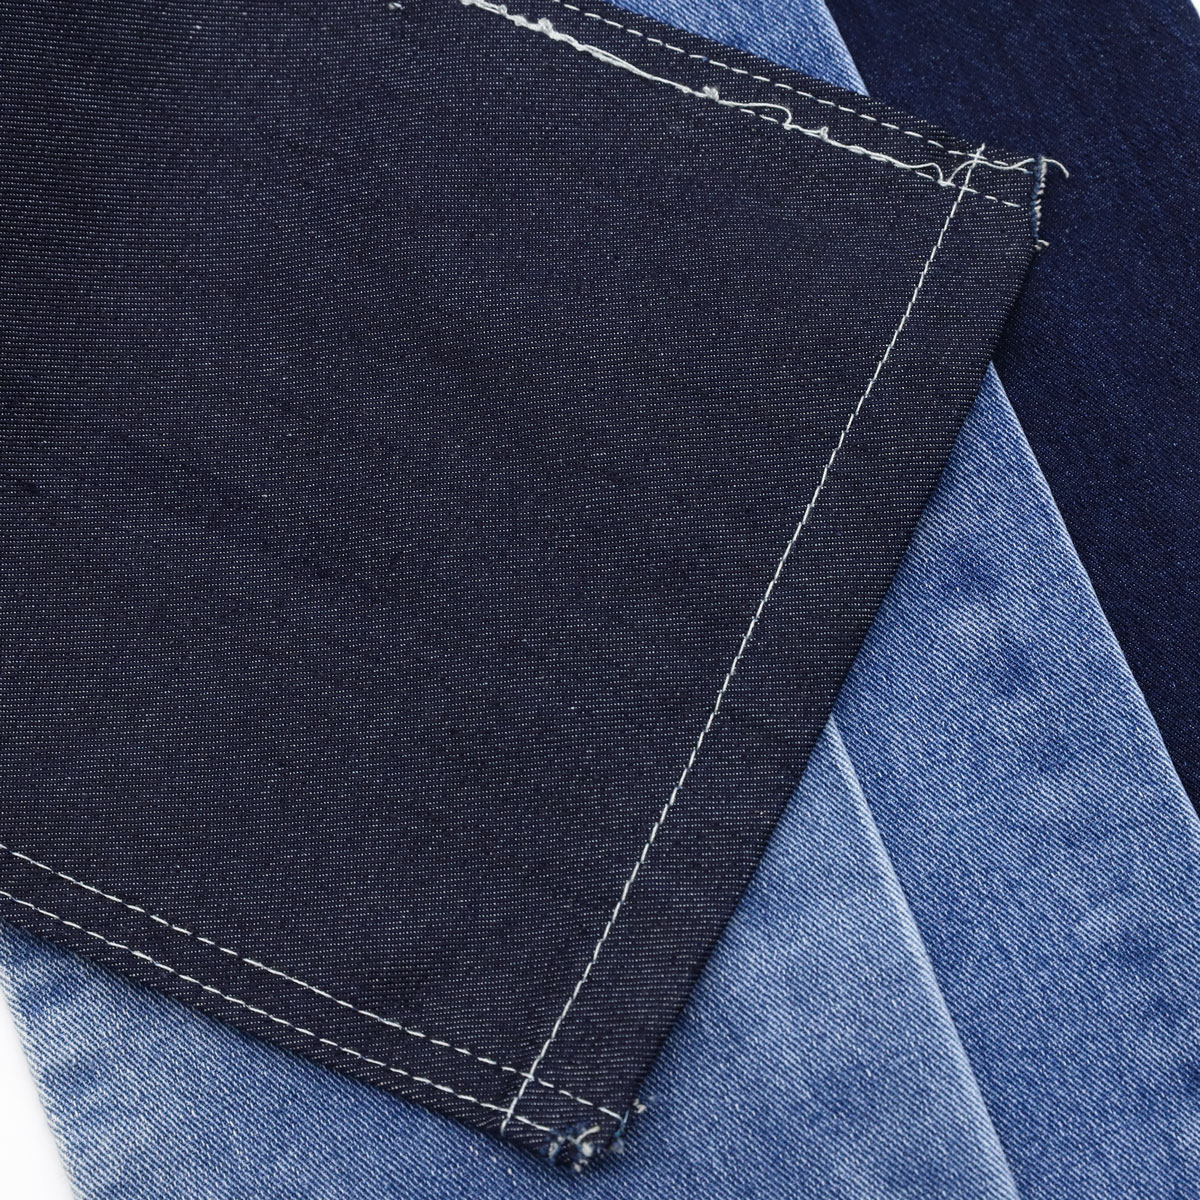 How to Wash Stretch Denim Fabric Without Shrinking 2